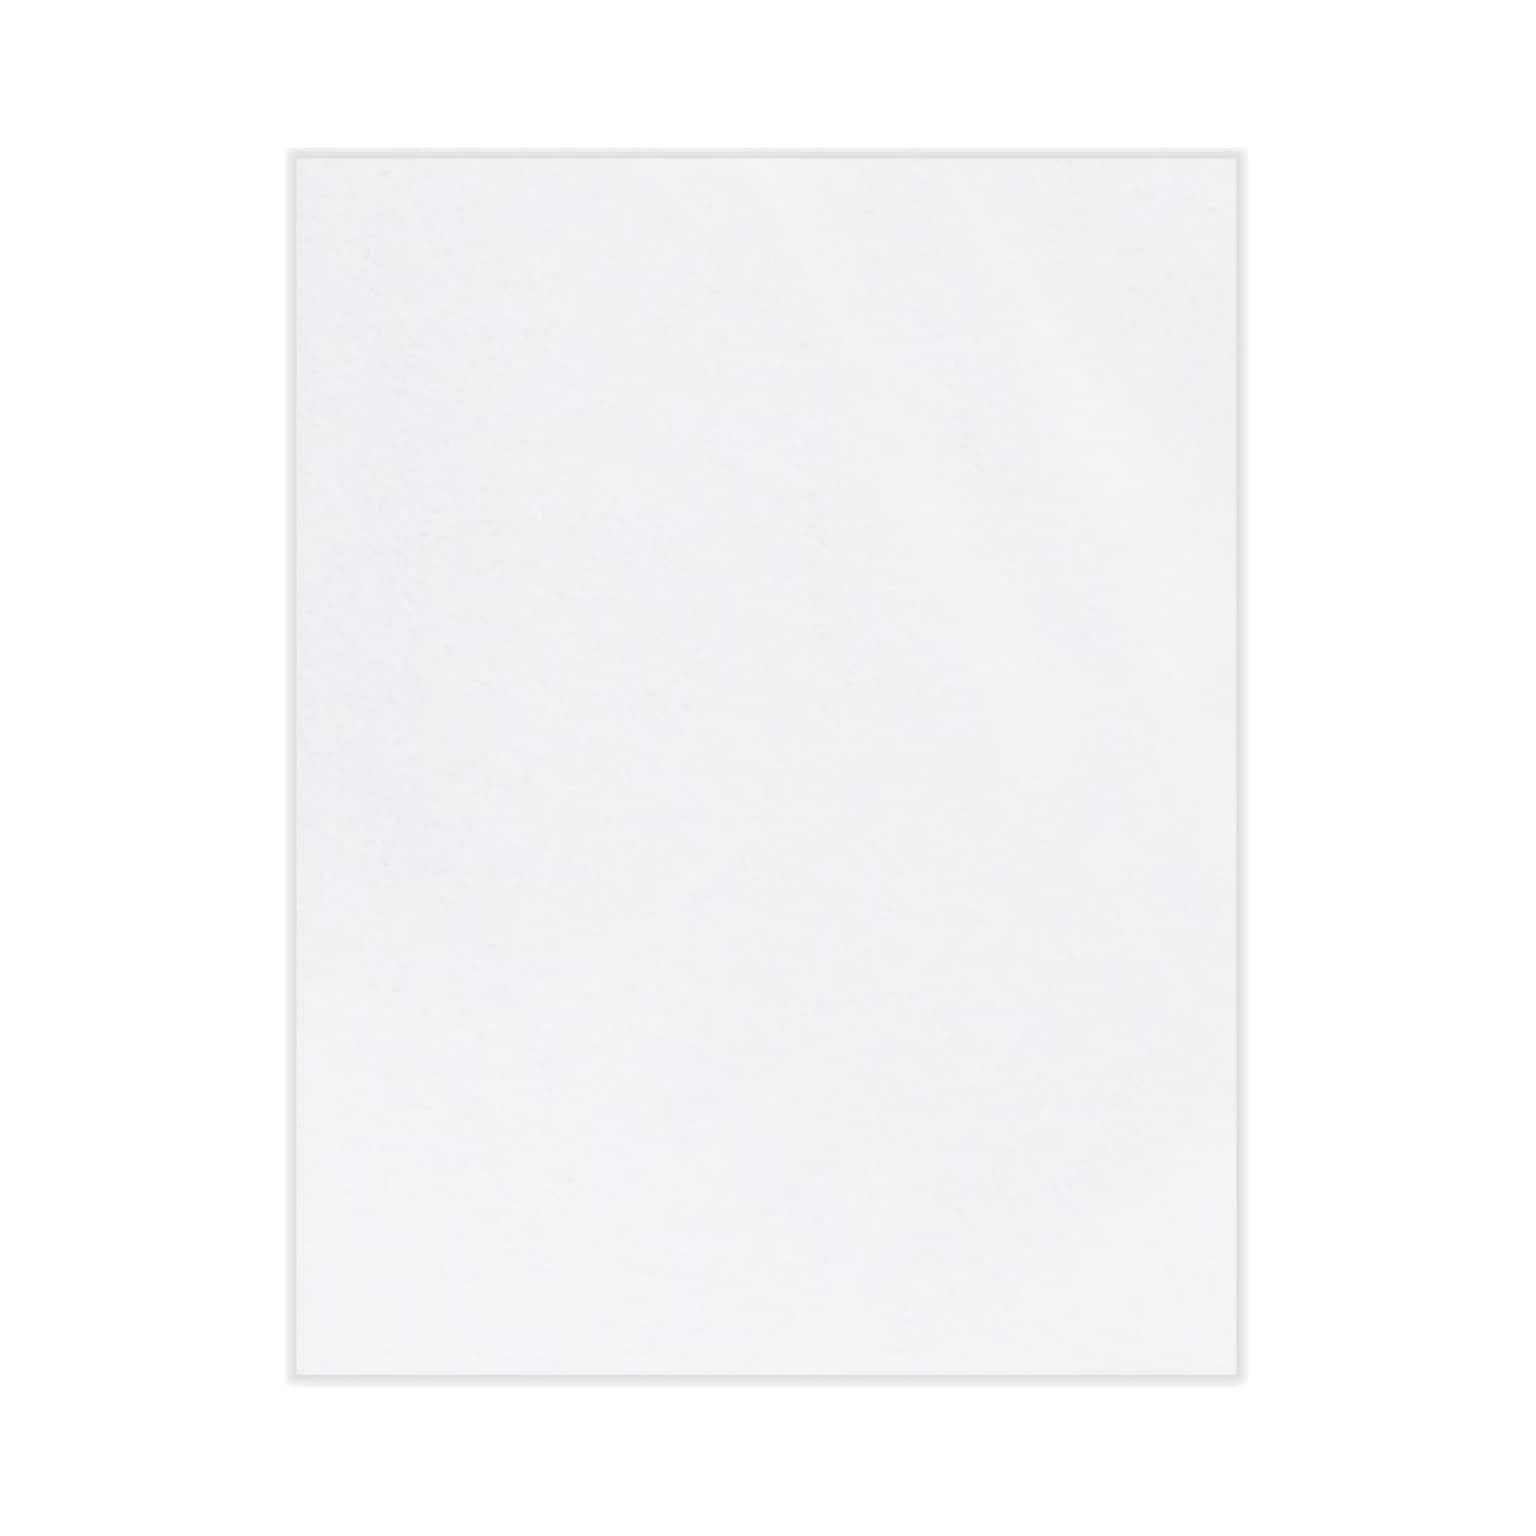 Lux Cardstock 8.5 x 11 inch Bright White 50/Pack